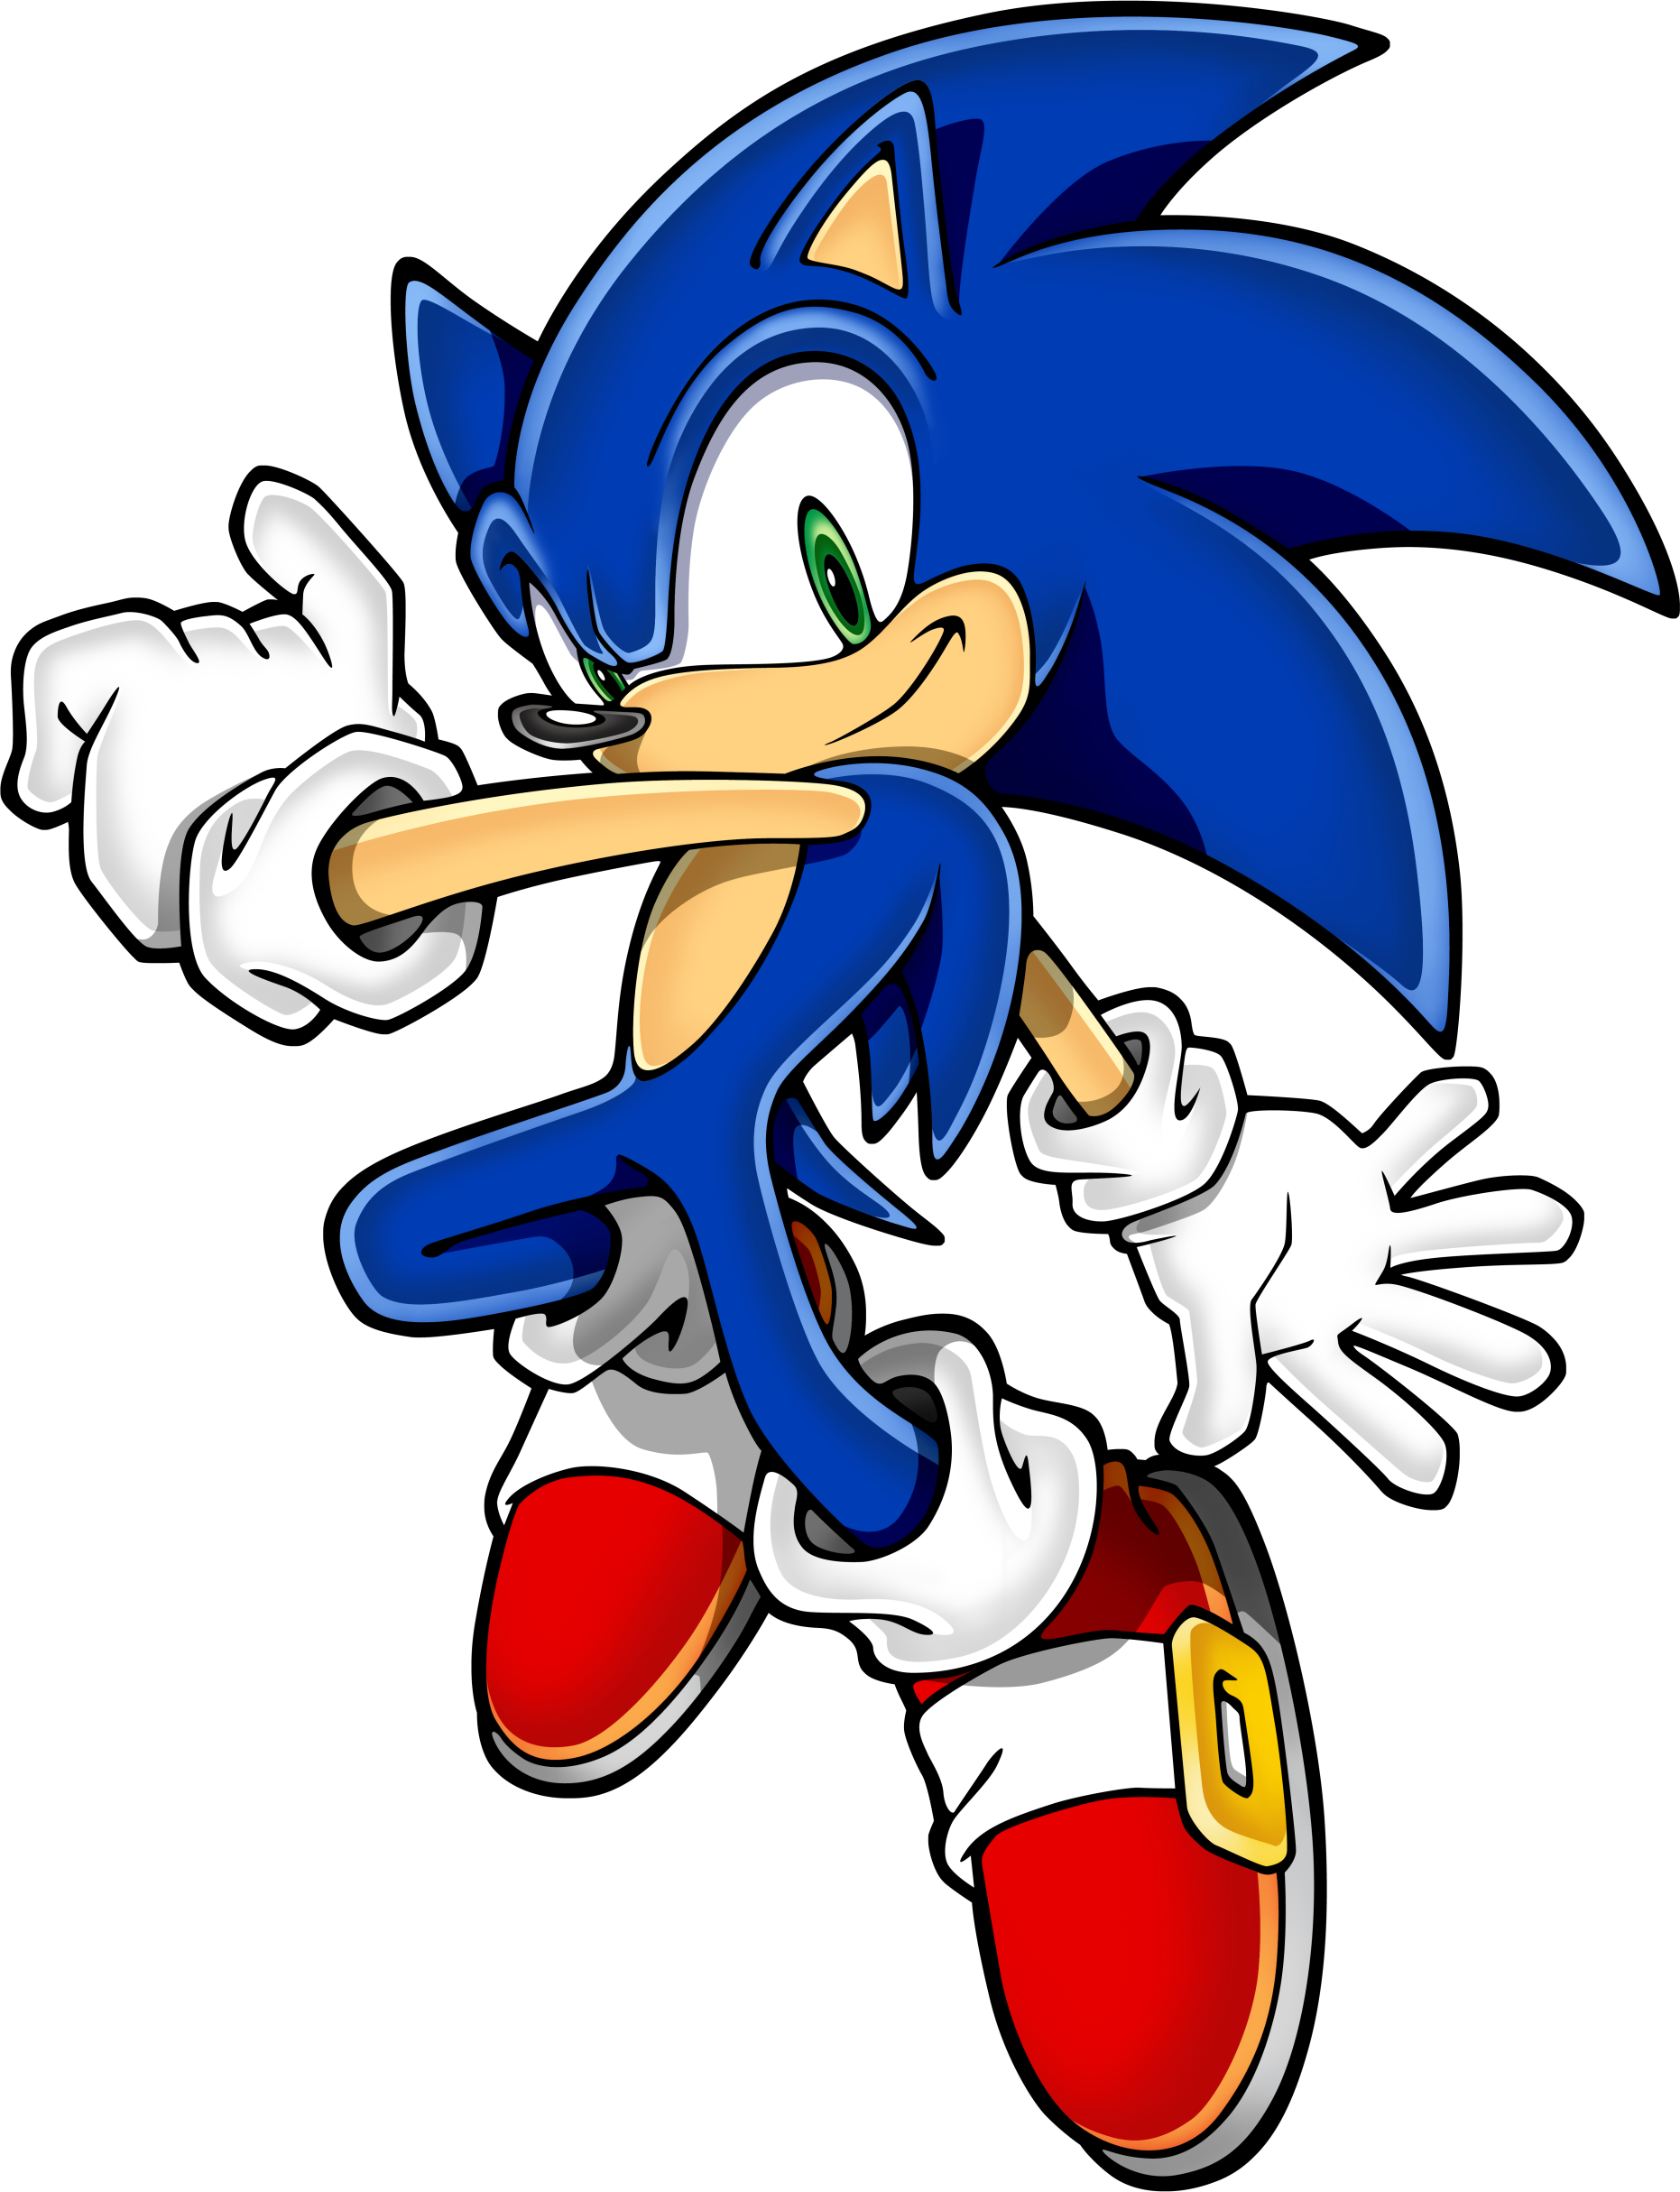 Download Sonic The Hedgehog Free PNG Photo Images And Clipart